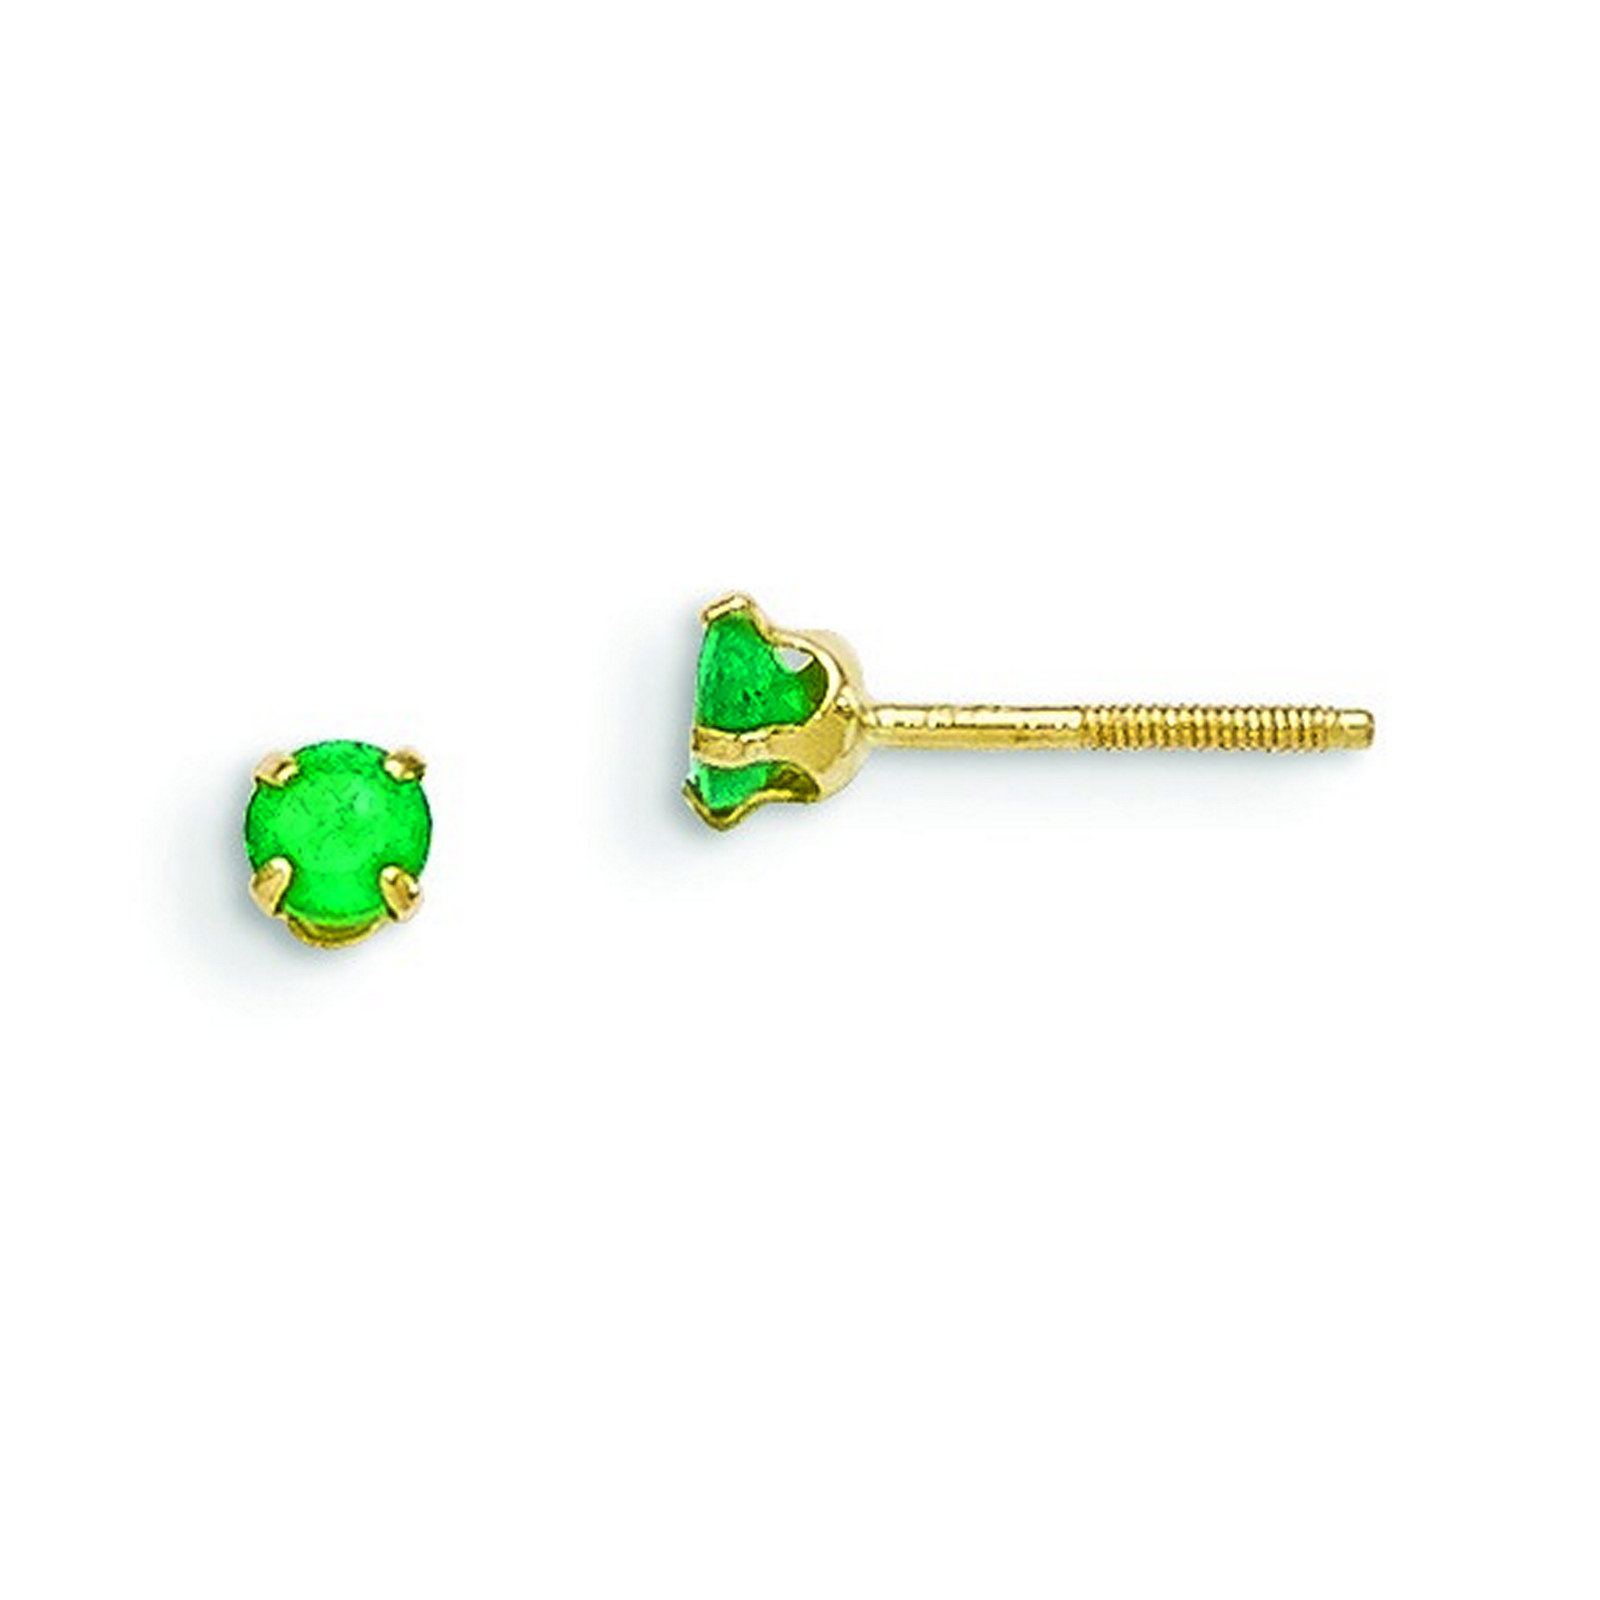 14k Yellow Gold 3mm Emerald Childrens Earrings - Measures 4x4mm